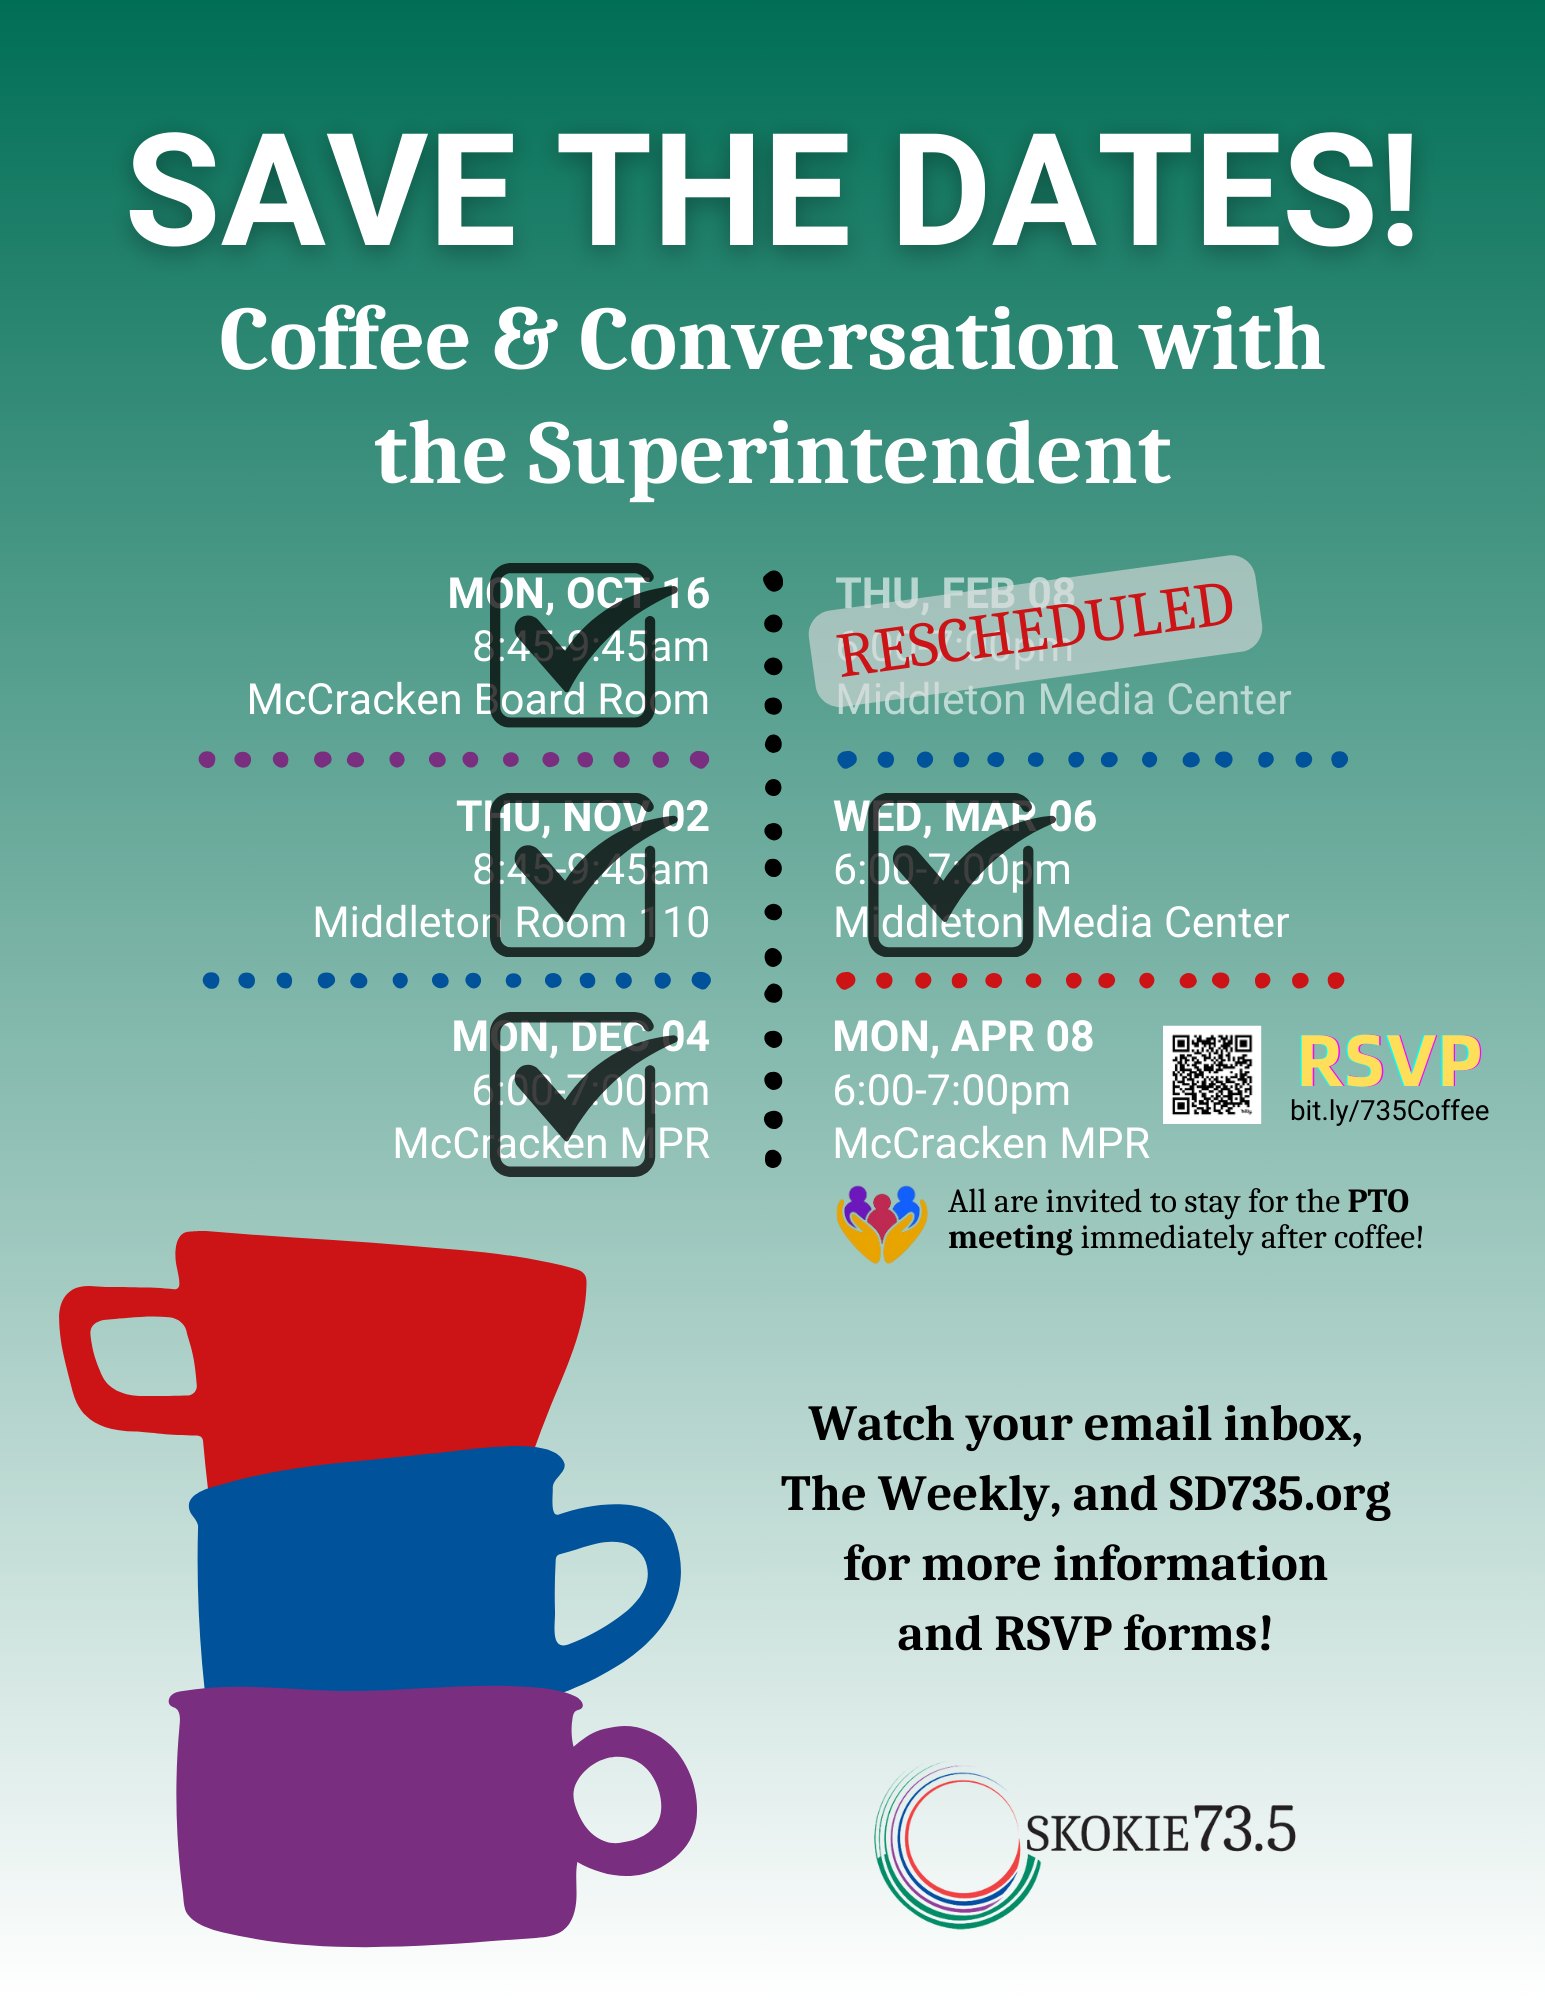 Coffee & Conversation with the Superintendent flyer